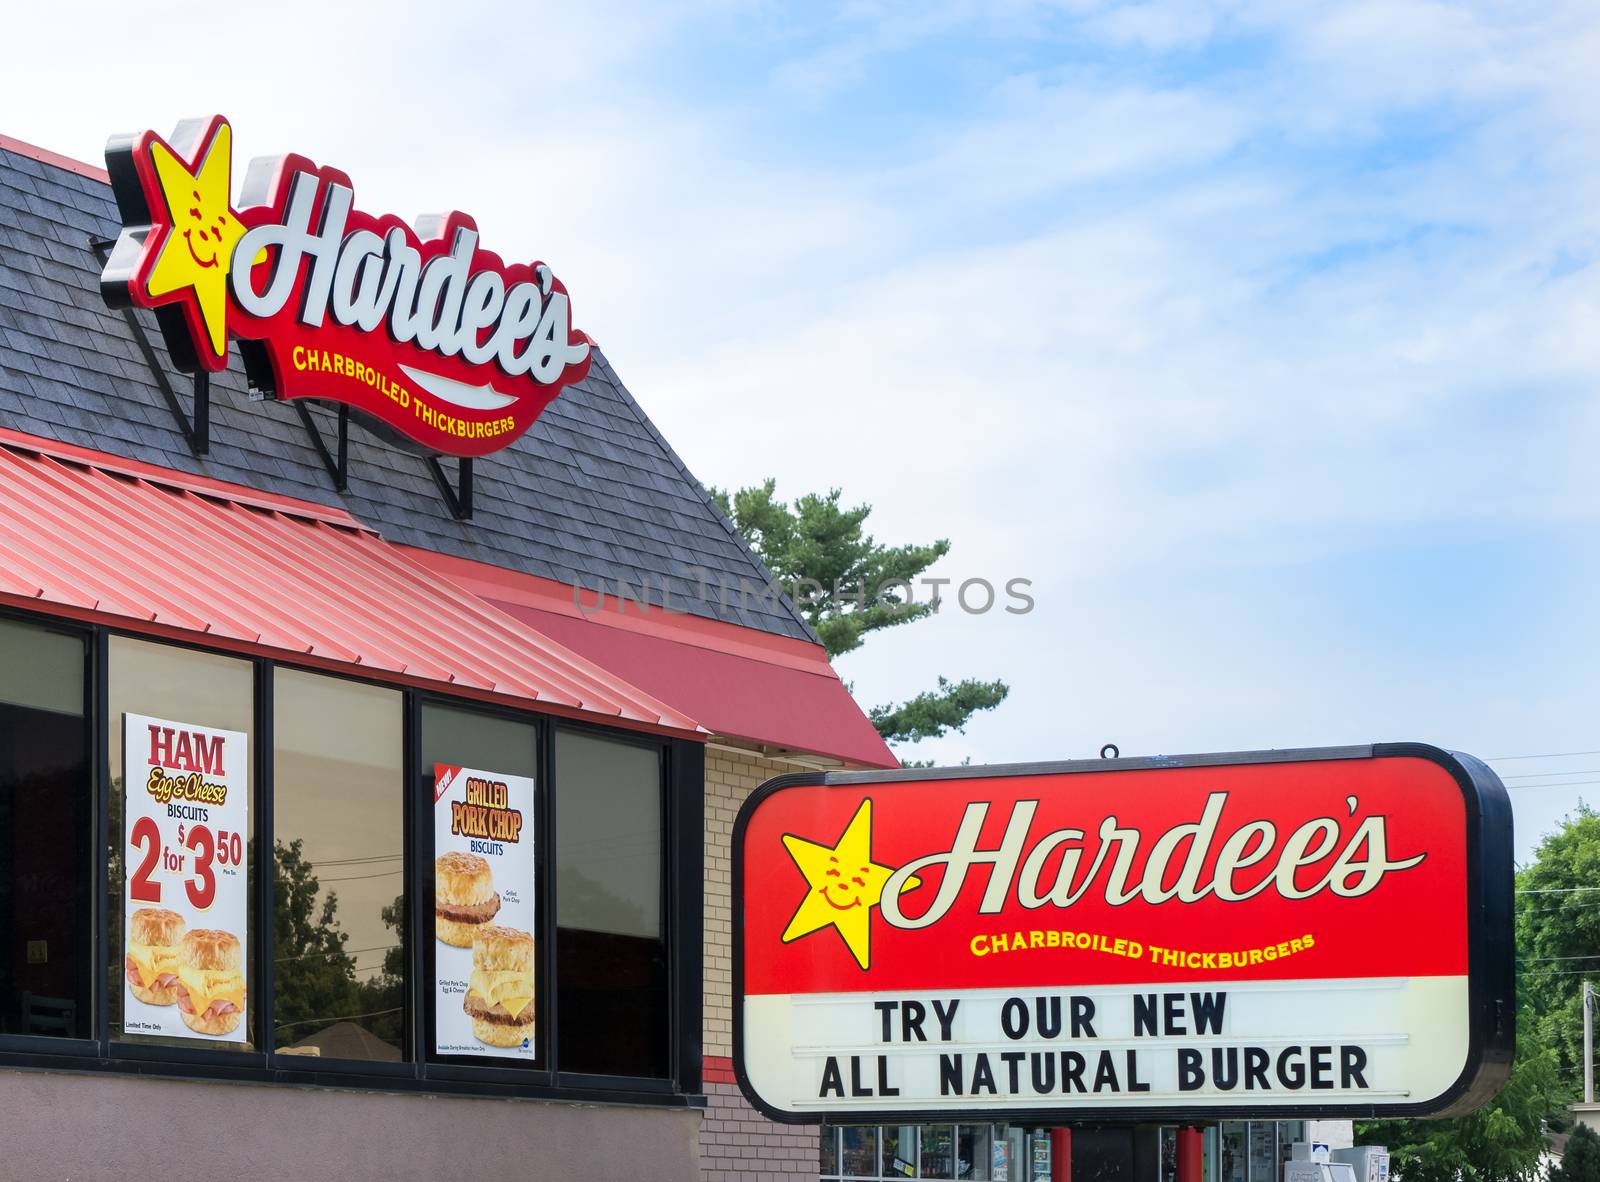 GRINNELL, IA/USA - AUGUST 8, 2015: Hardee's restaurant exterior and sign. Hardee's Food Systems, Inc., is an American fast-food restaurant chain.